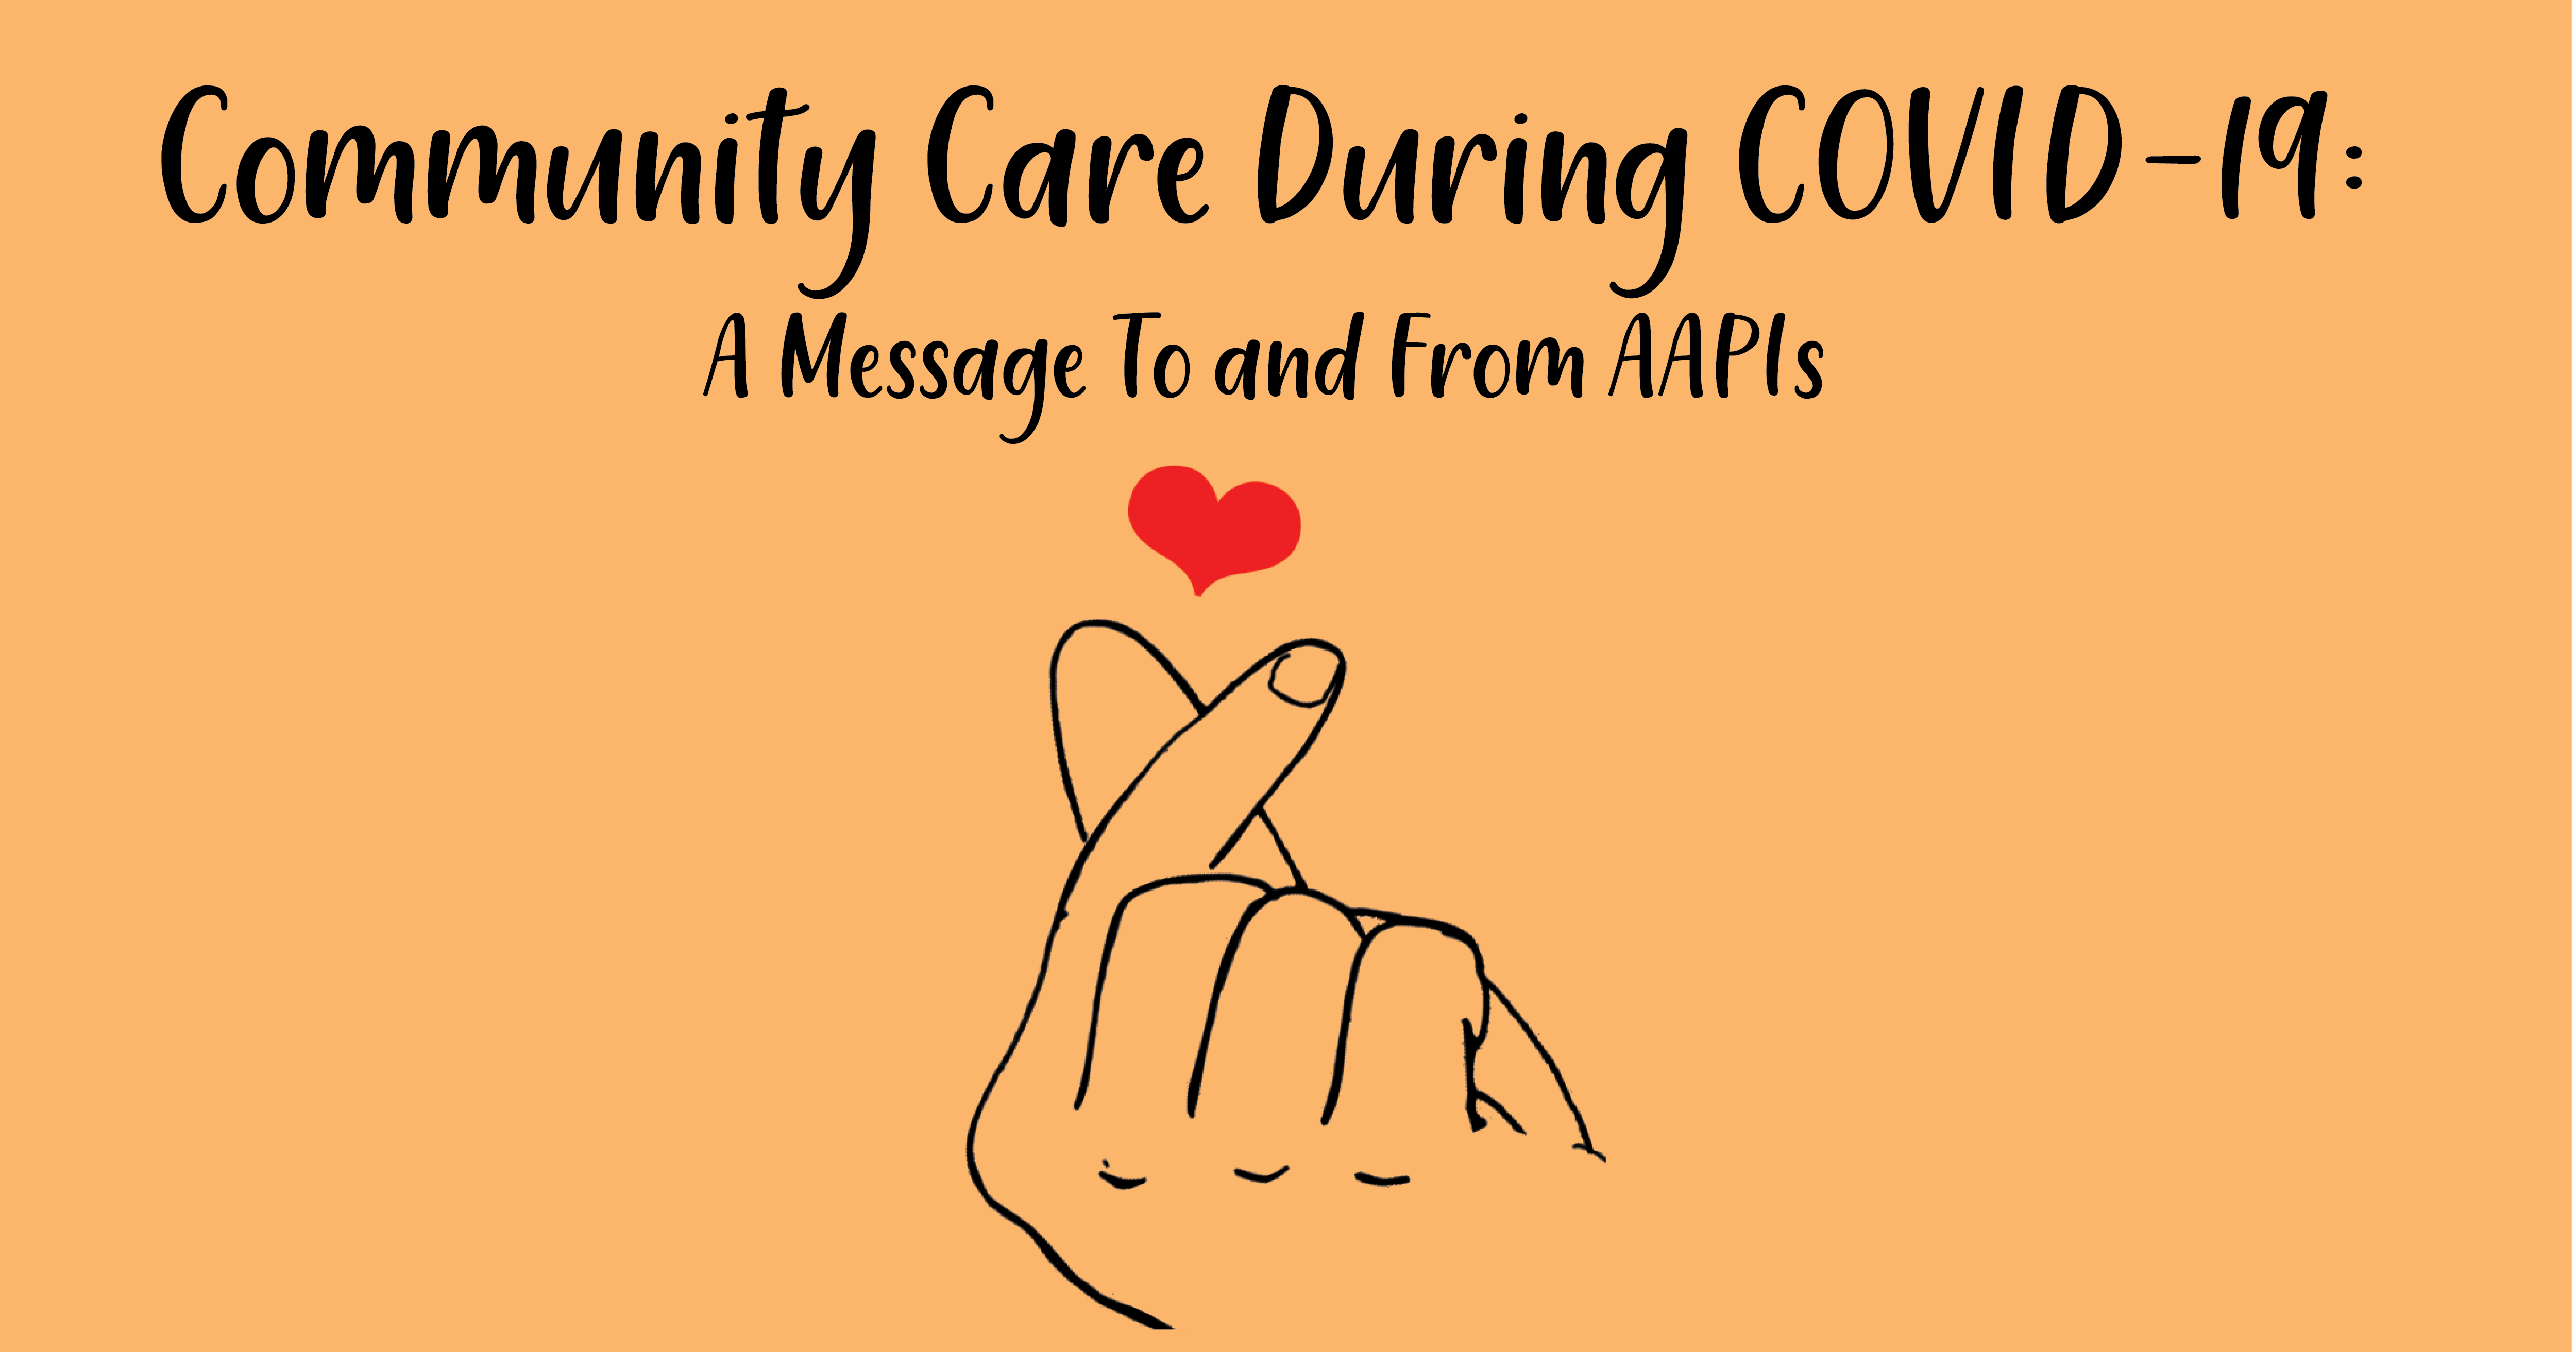 Community Care During Covid 19 A Message To And From pis By pi Force Ef Medium